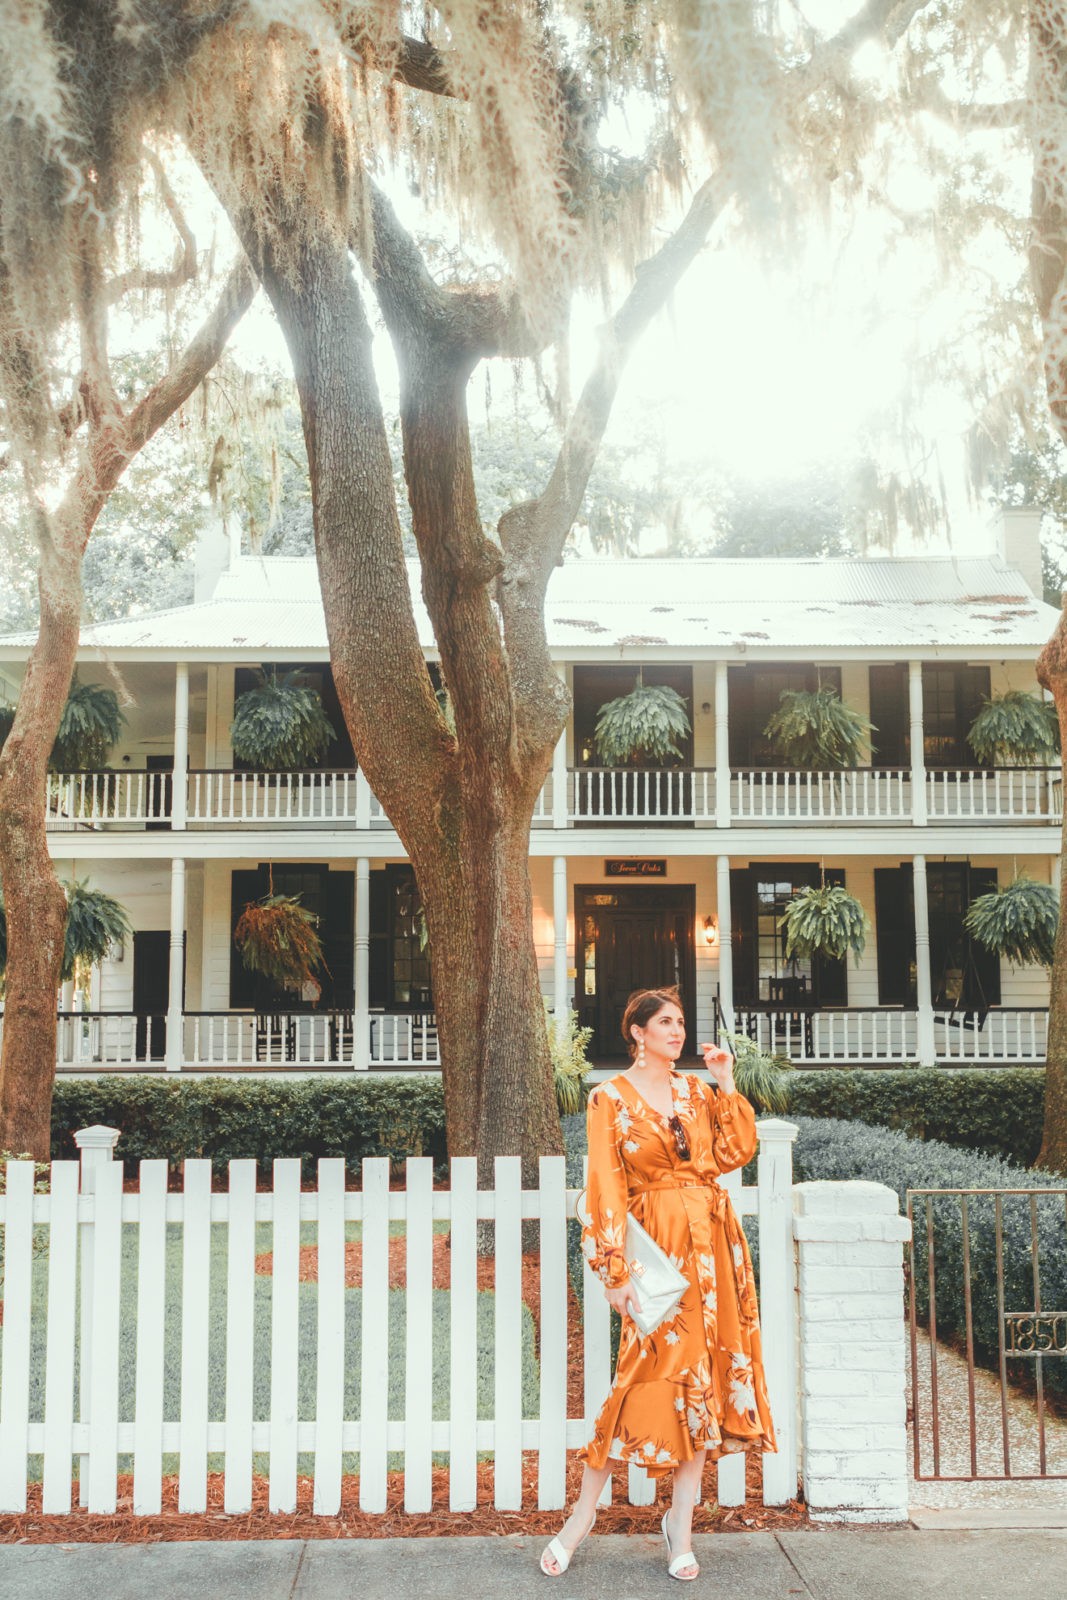 Montage Palmetto Bluff Resort Review by Luxury Travel Blogger Laura Lily: image of a woman standing outside on the groundsof the Palmetto Resort.